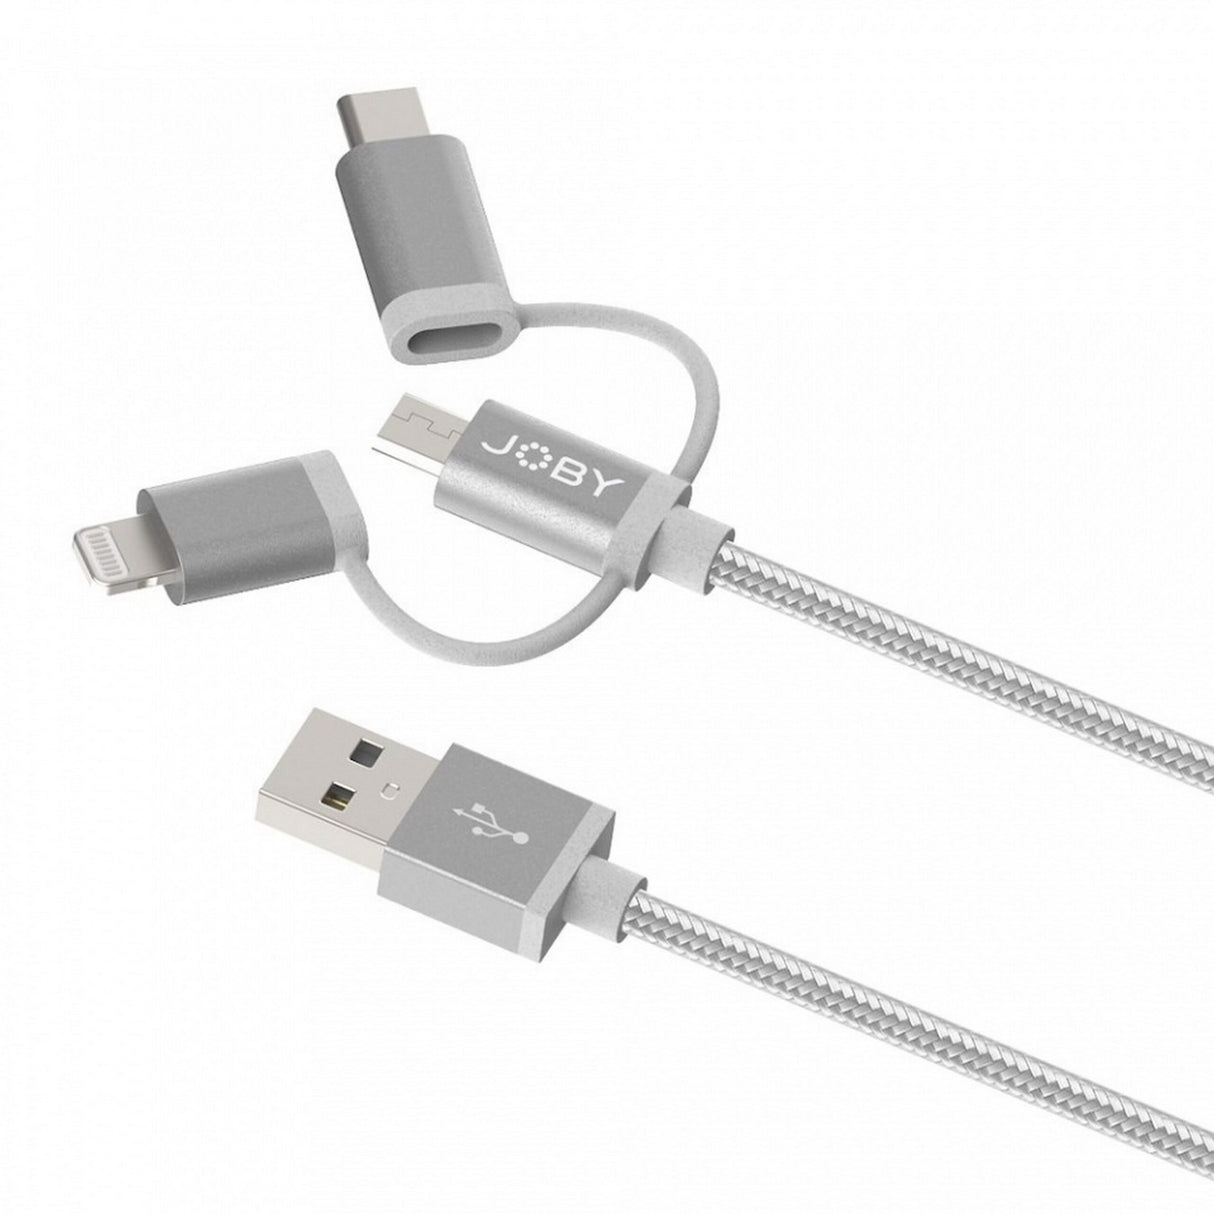 Joby JB01818 3-In-1 Charge and Sync Cable, 1.2-Meter, Space Grey